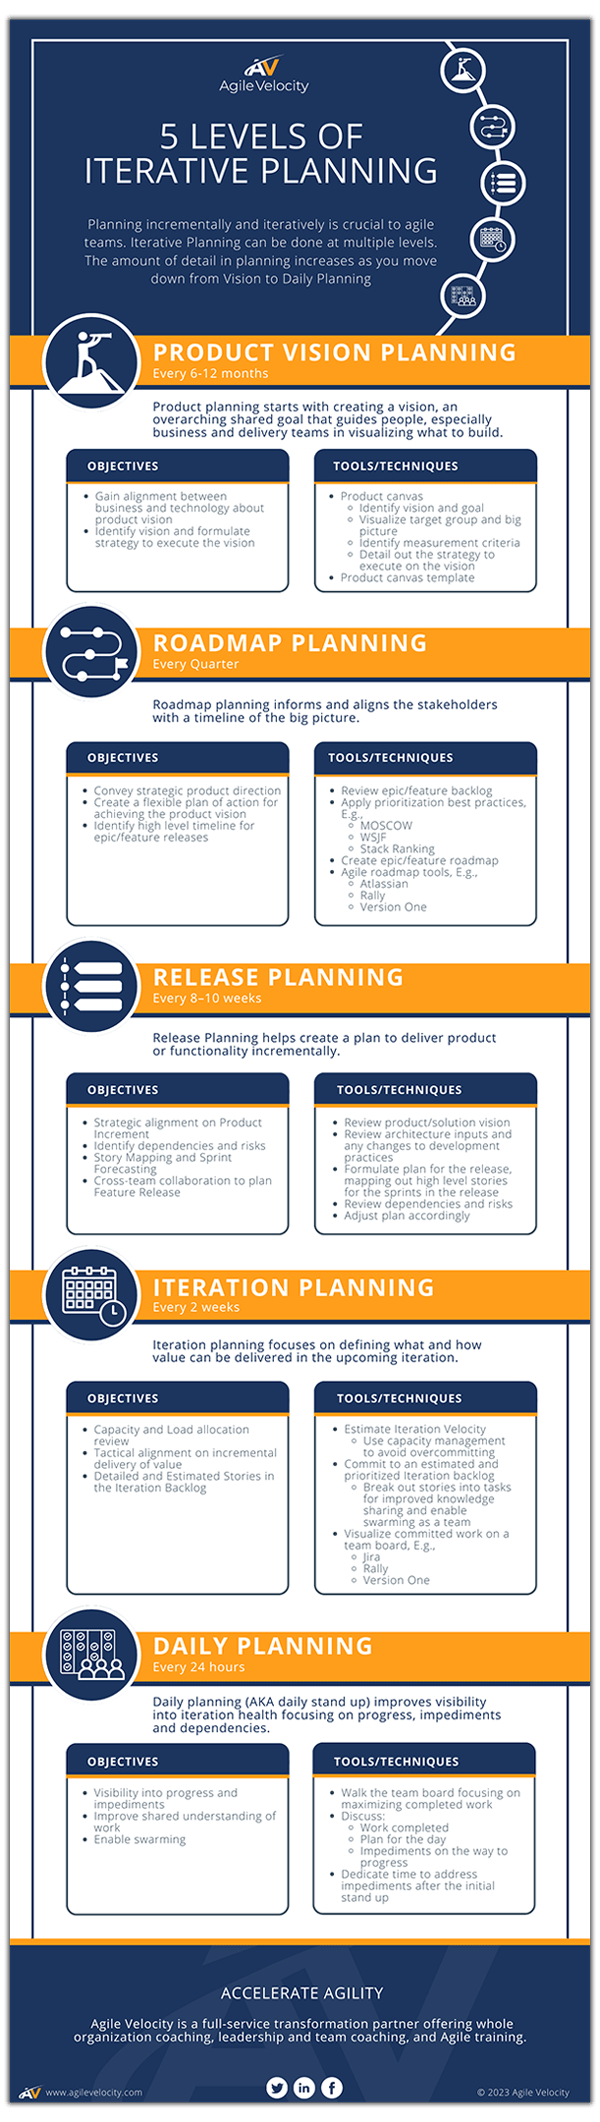 Infographic detailing the 5 levels of iterative planning